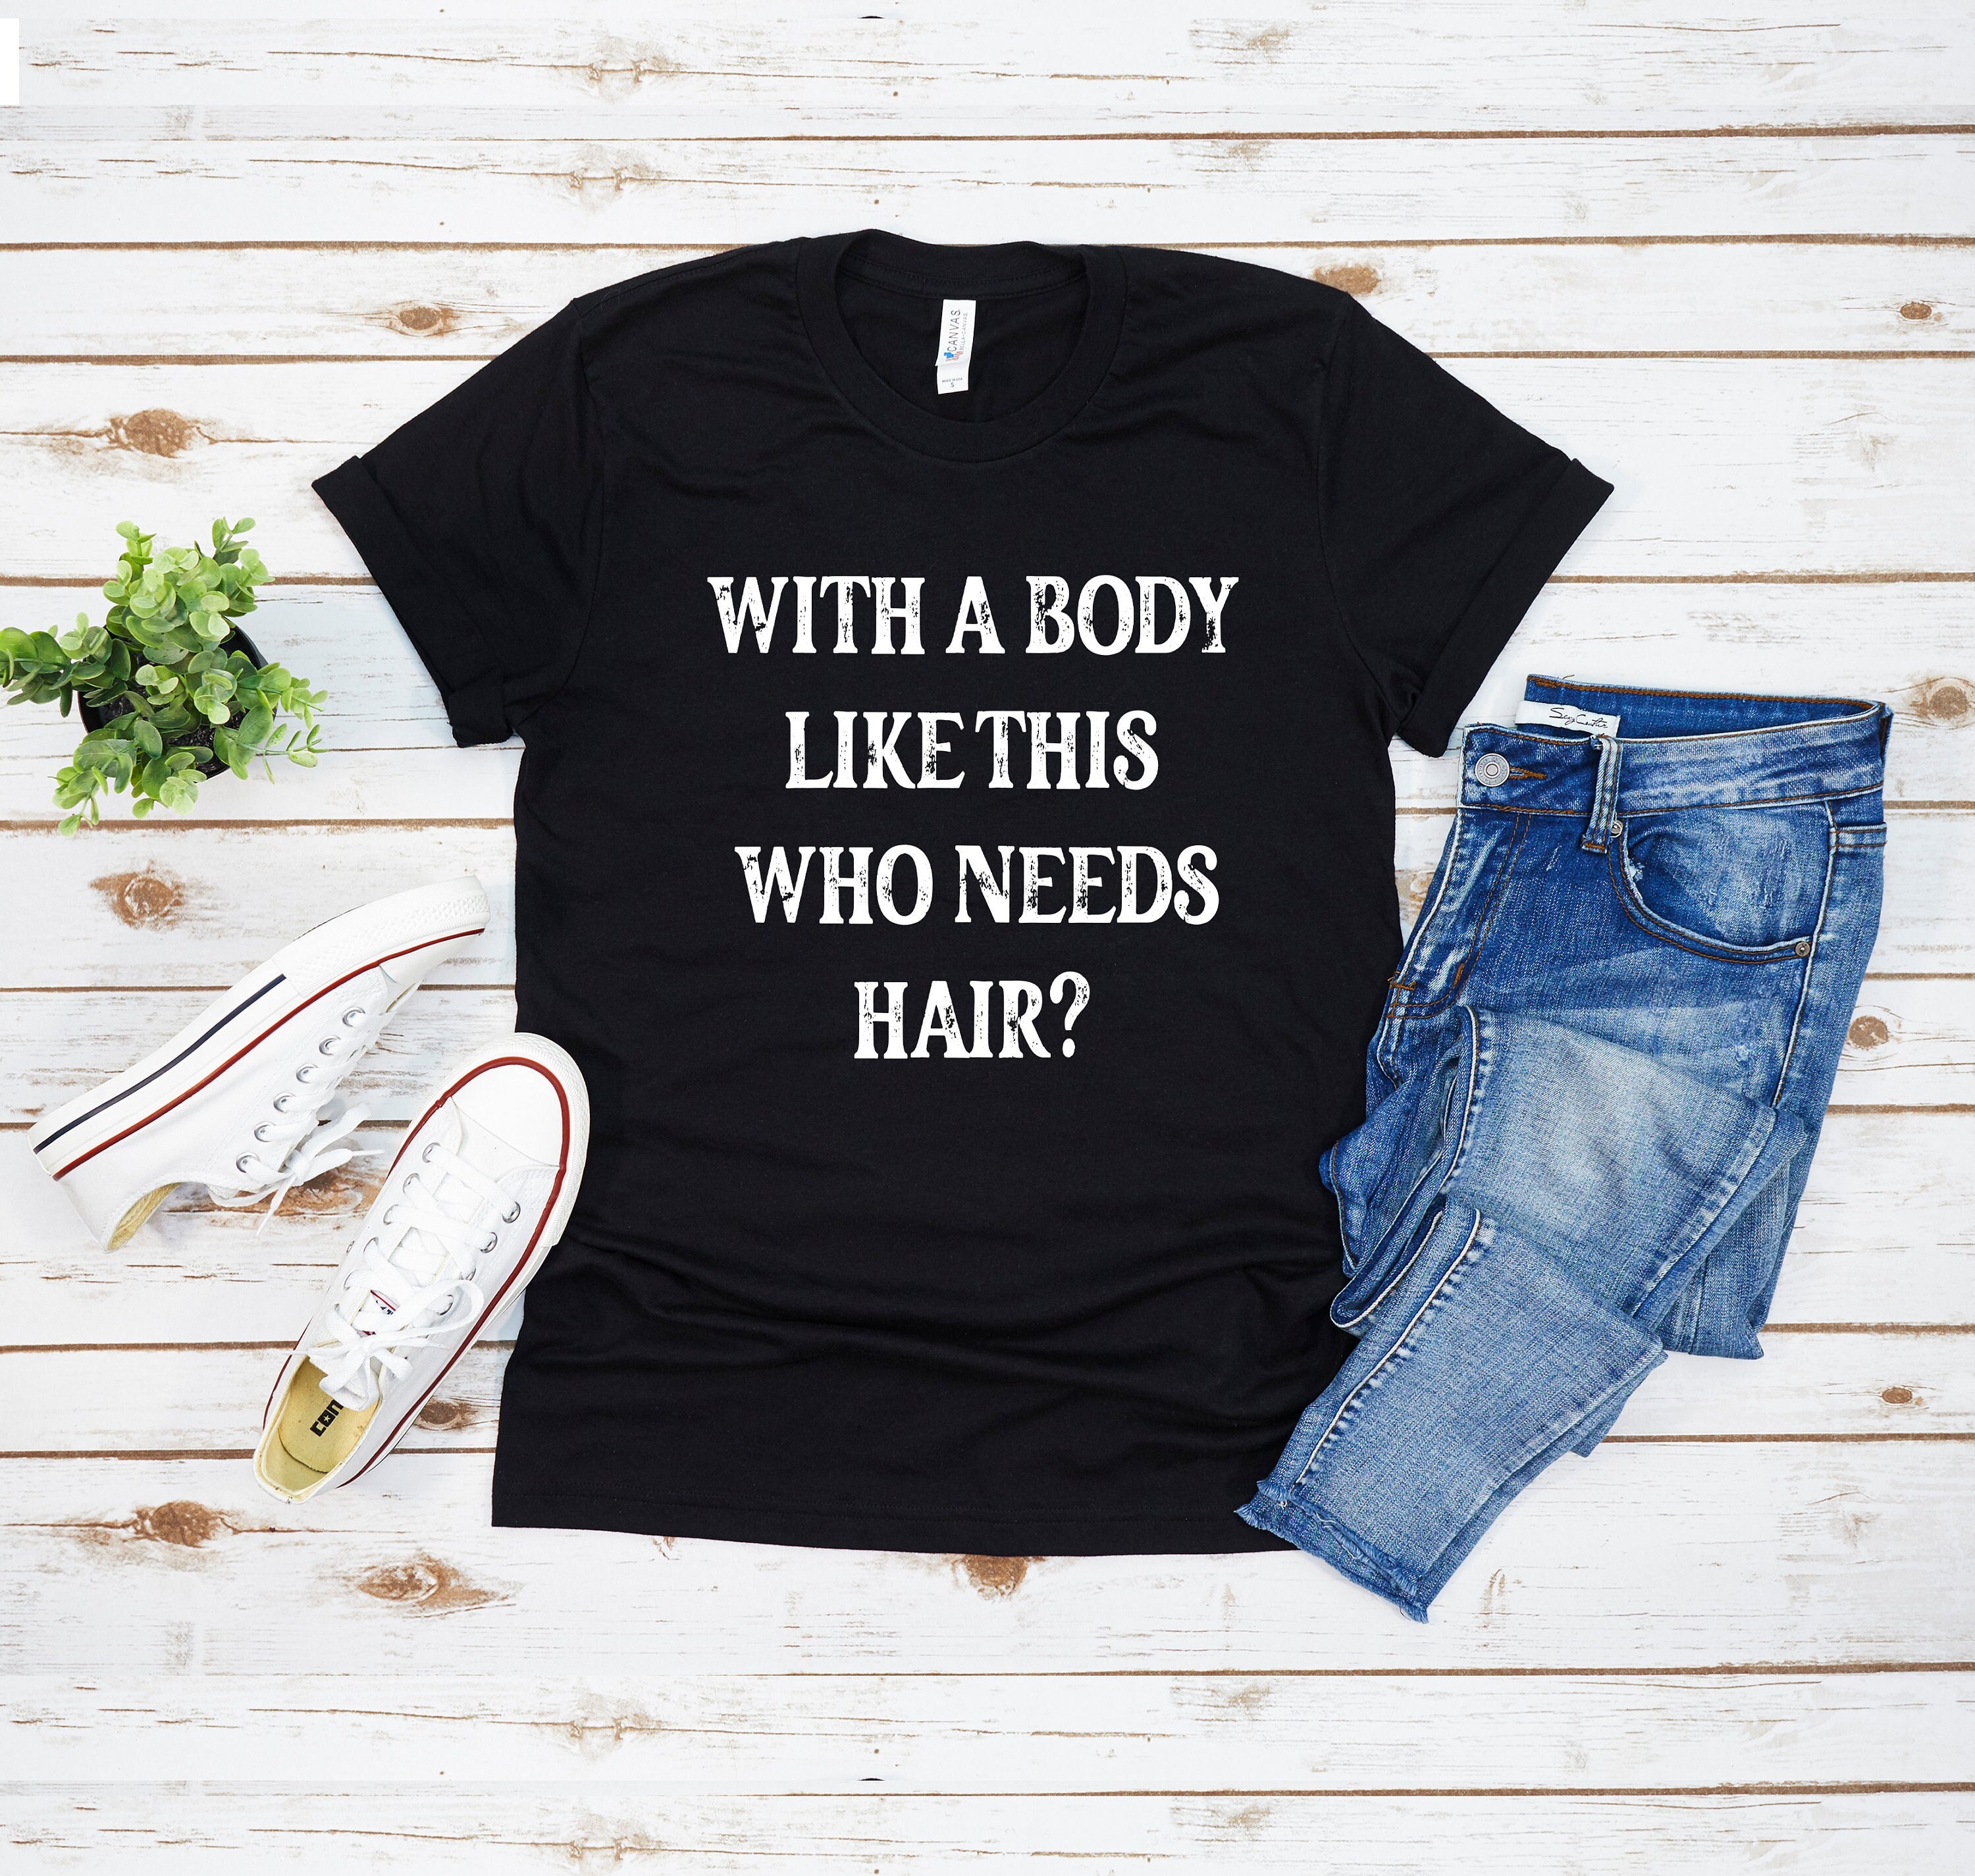 Who Needs Hair T-Shirt, With a Body Like This Who Needs Hair T-Shirt